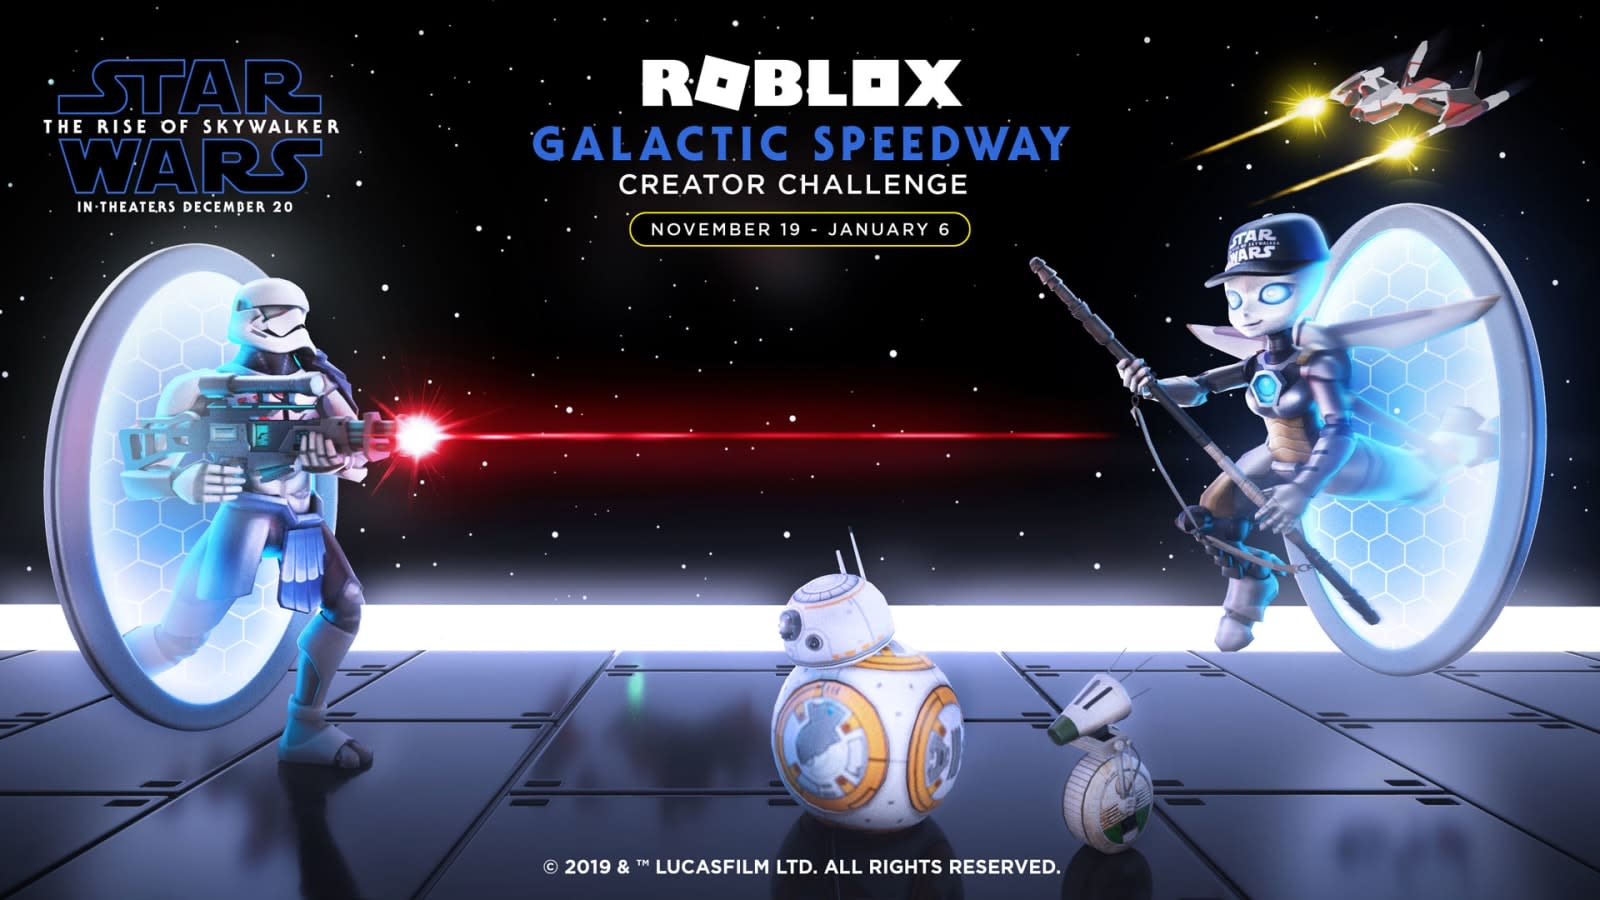 Roblox Wants You To Build Star Wars Speeder To Celebrate Rise